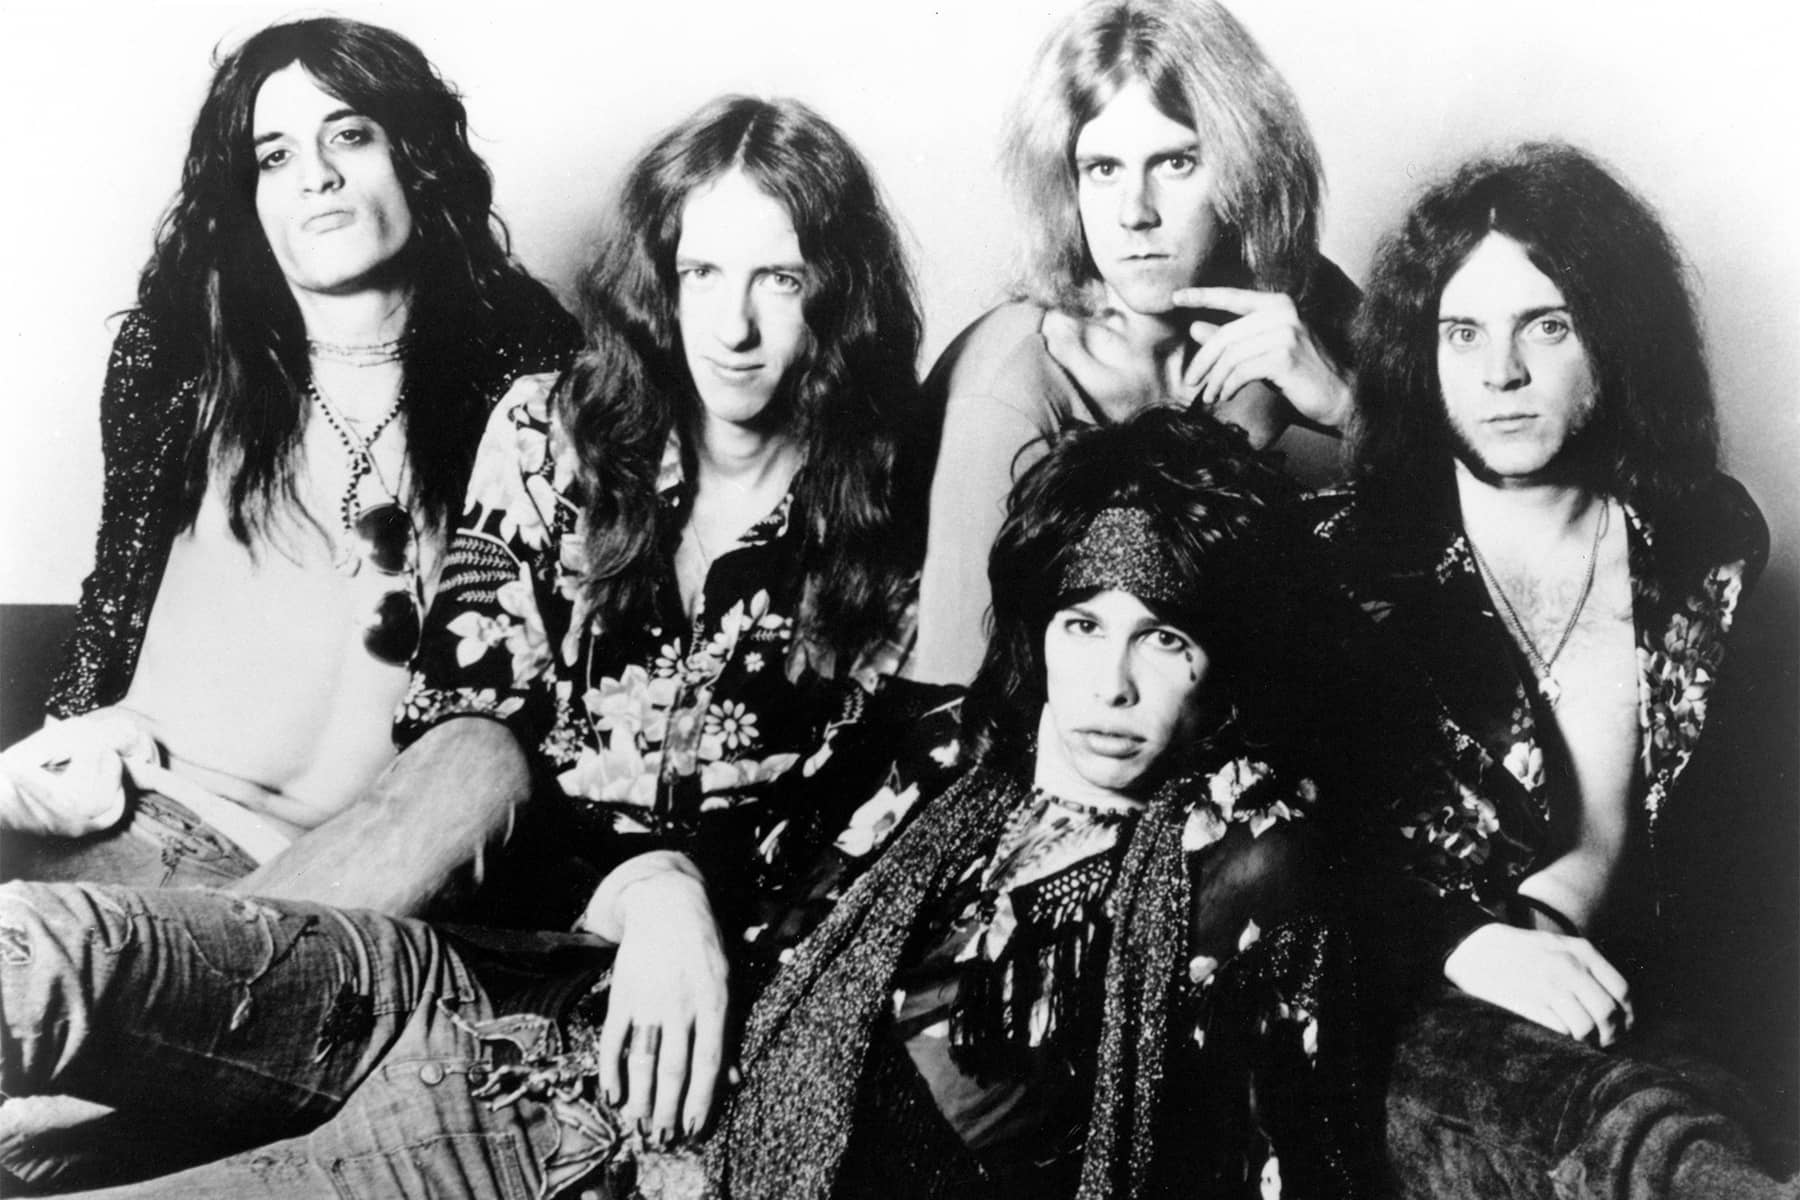 photo-of-aerosmith-and-joe-perry-and-tom-hamilton-and-steven-tyler-and-brad-whitford-and-joey-kramer